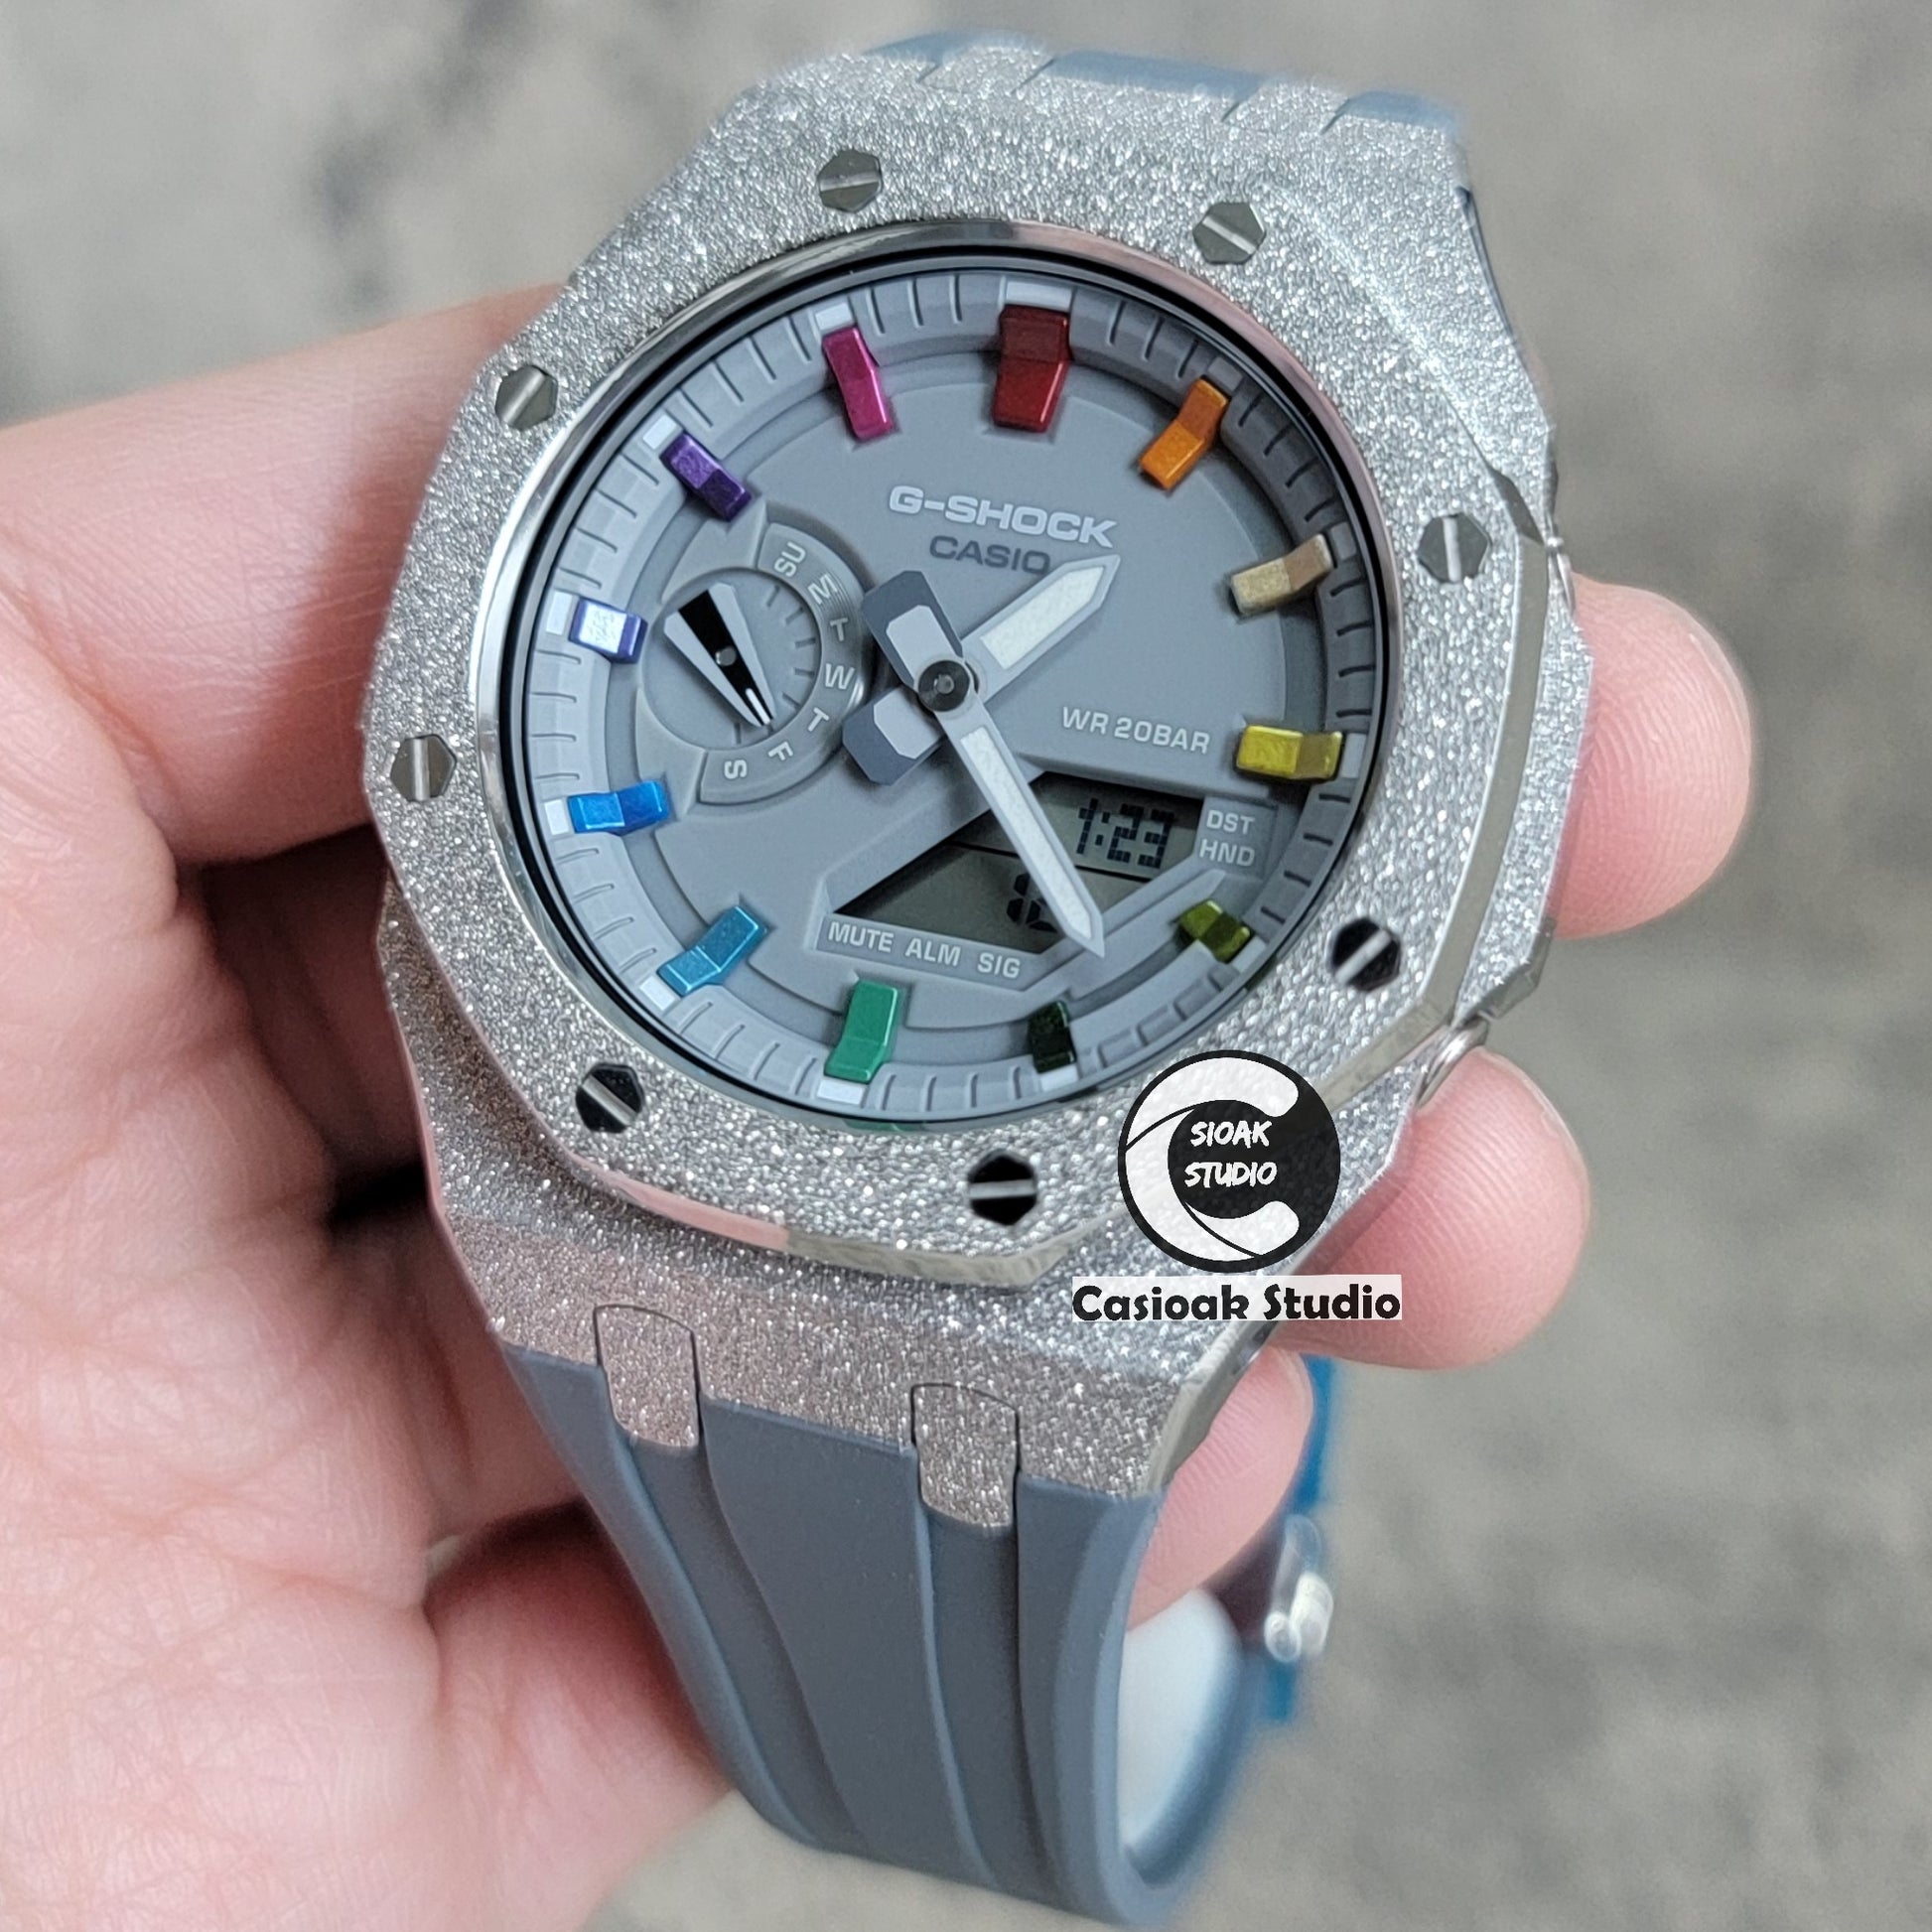 Casioak Mod Watch Frosted Silver Case Gray Strap Gray Rainbow Time Mark Gray Dial 44mm - Casioak Studio